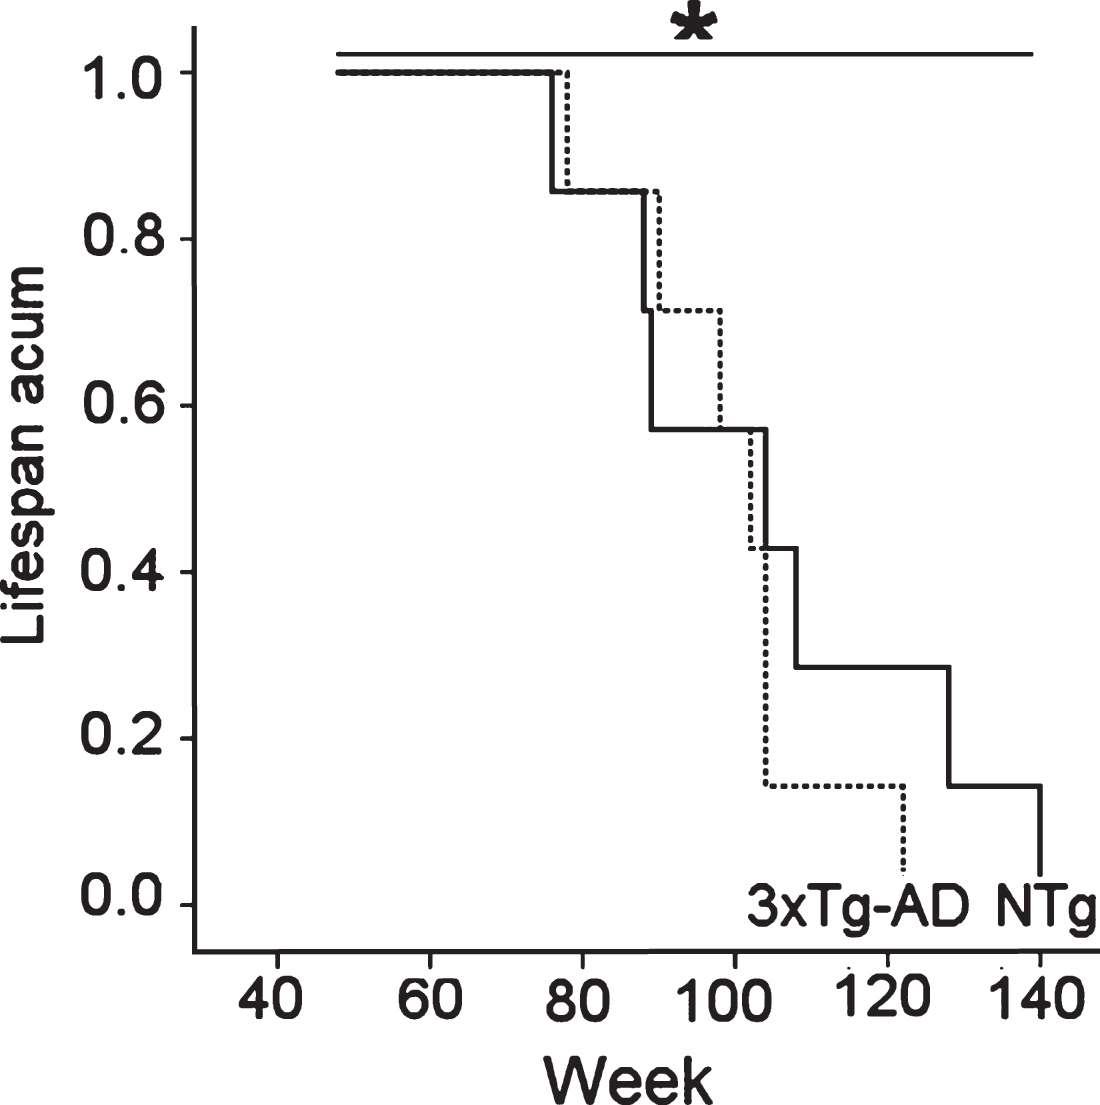 Difference in the survival curves of 18-month-old female 3xTg-AD mice and age-matched NTg counterparts was found in spite of similar mean life expectancies. Kaplan-Meyer test, * p < 0.05.